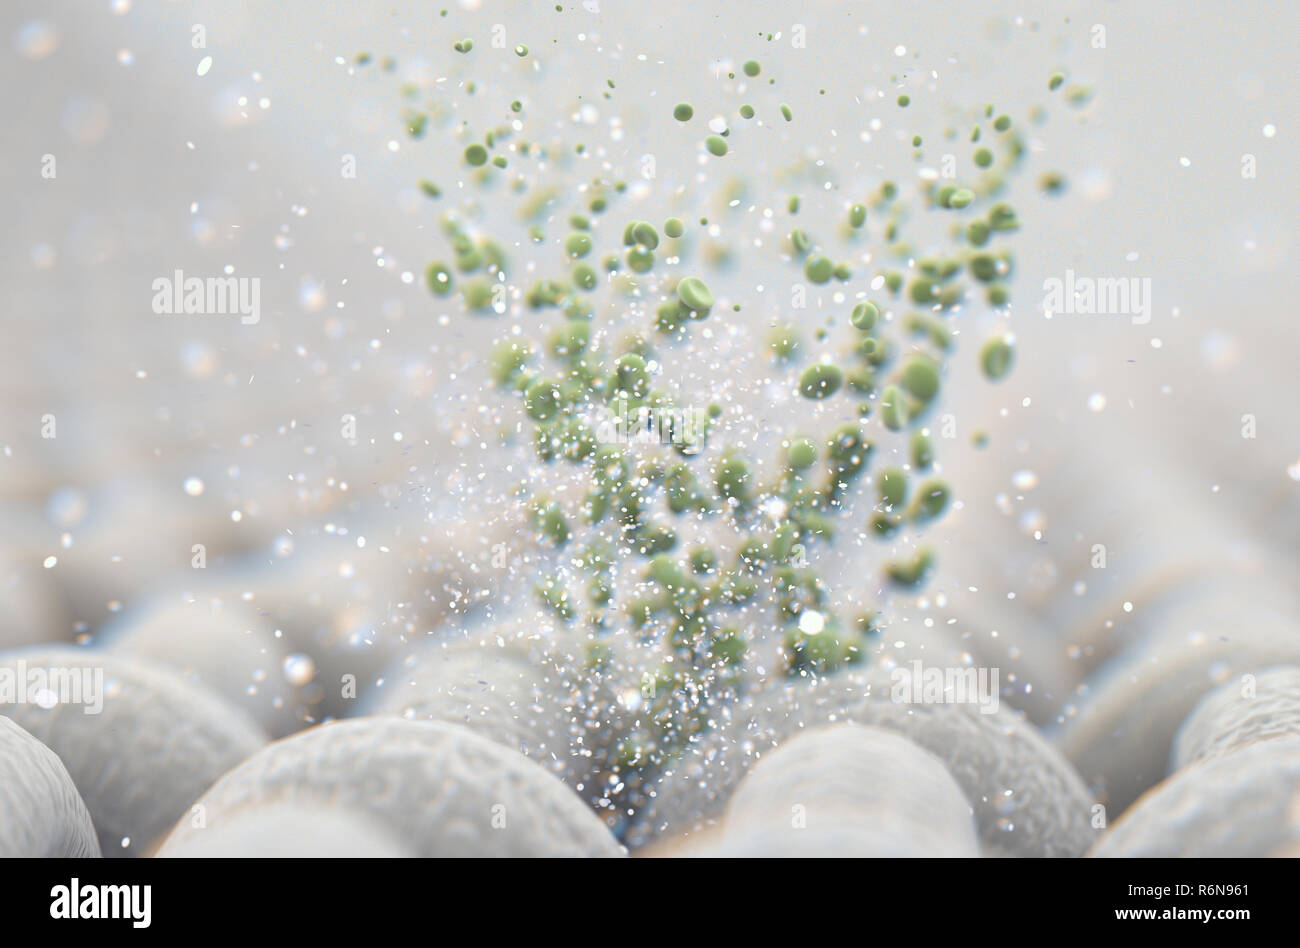 A microscopic close up view of a simple woven textile and a visible green particles  - 3D render Stock Photo